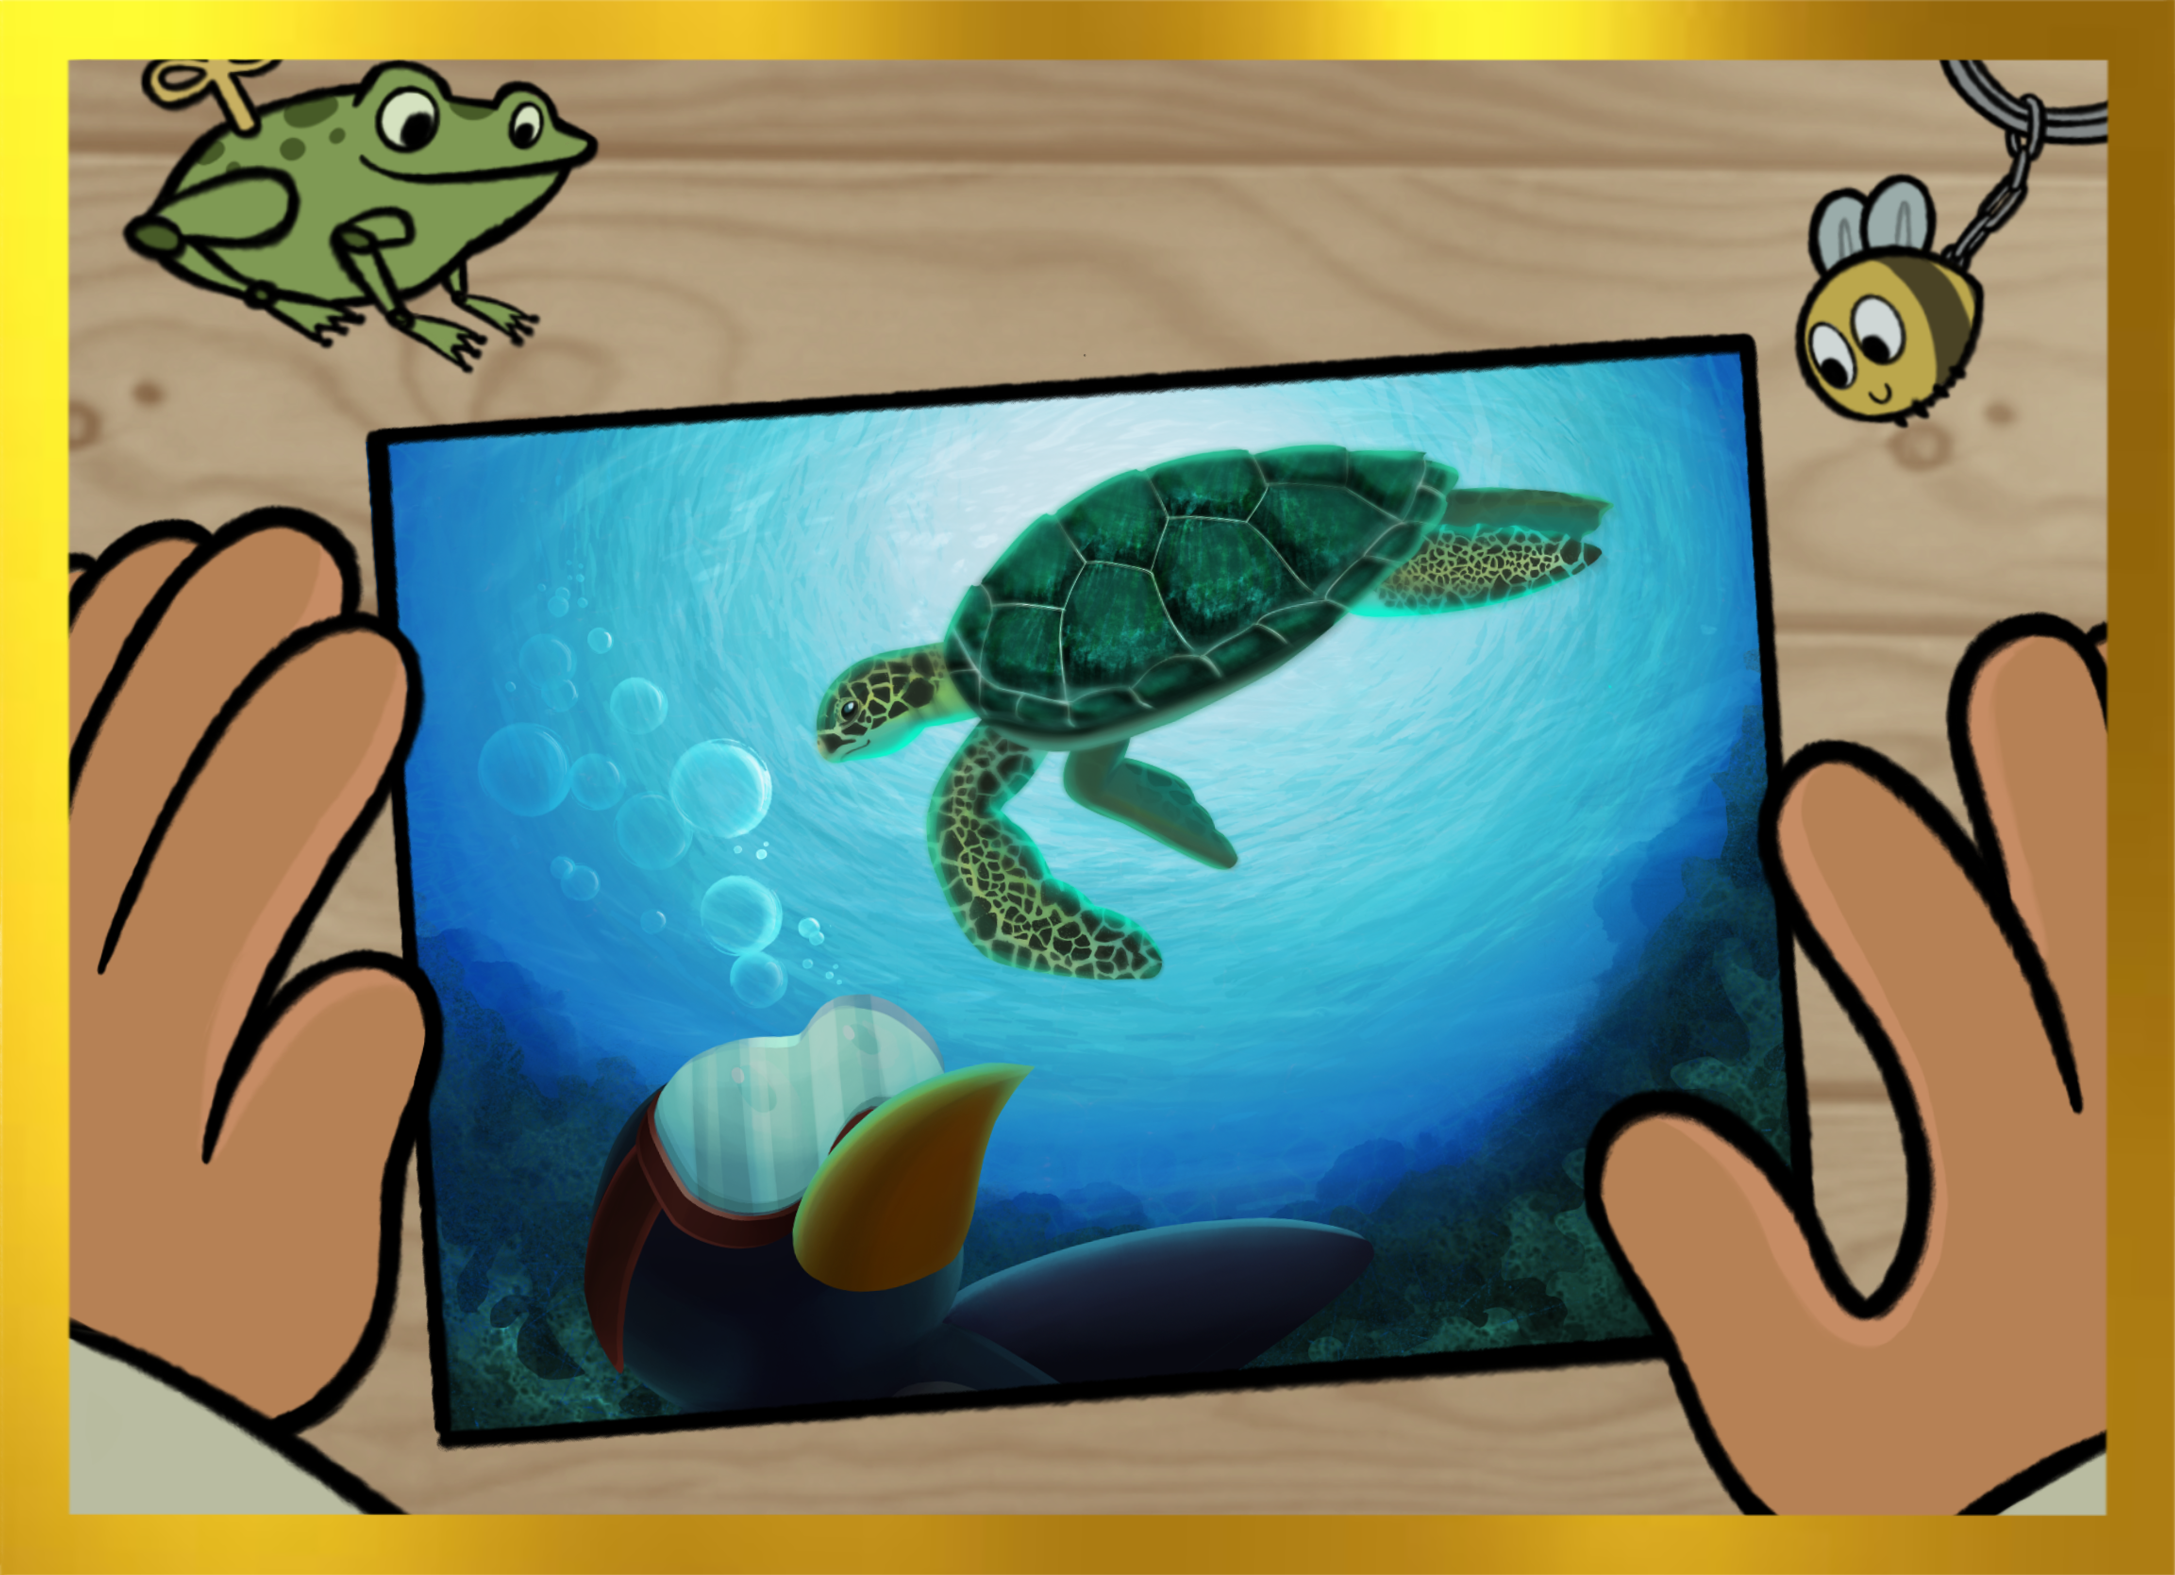 A photo of JiJi underwater wearing goggles. Above them is a large turtle